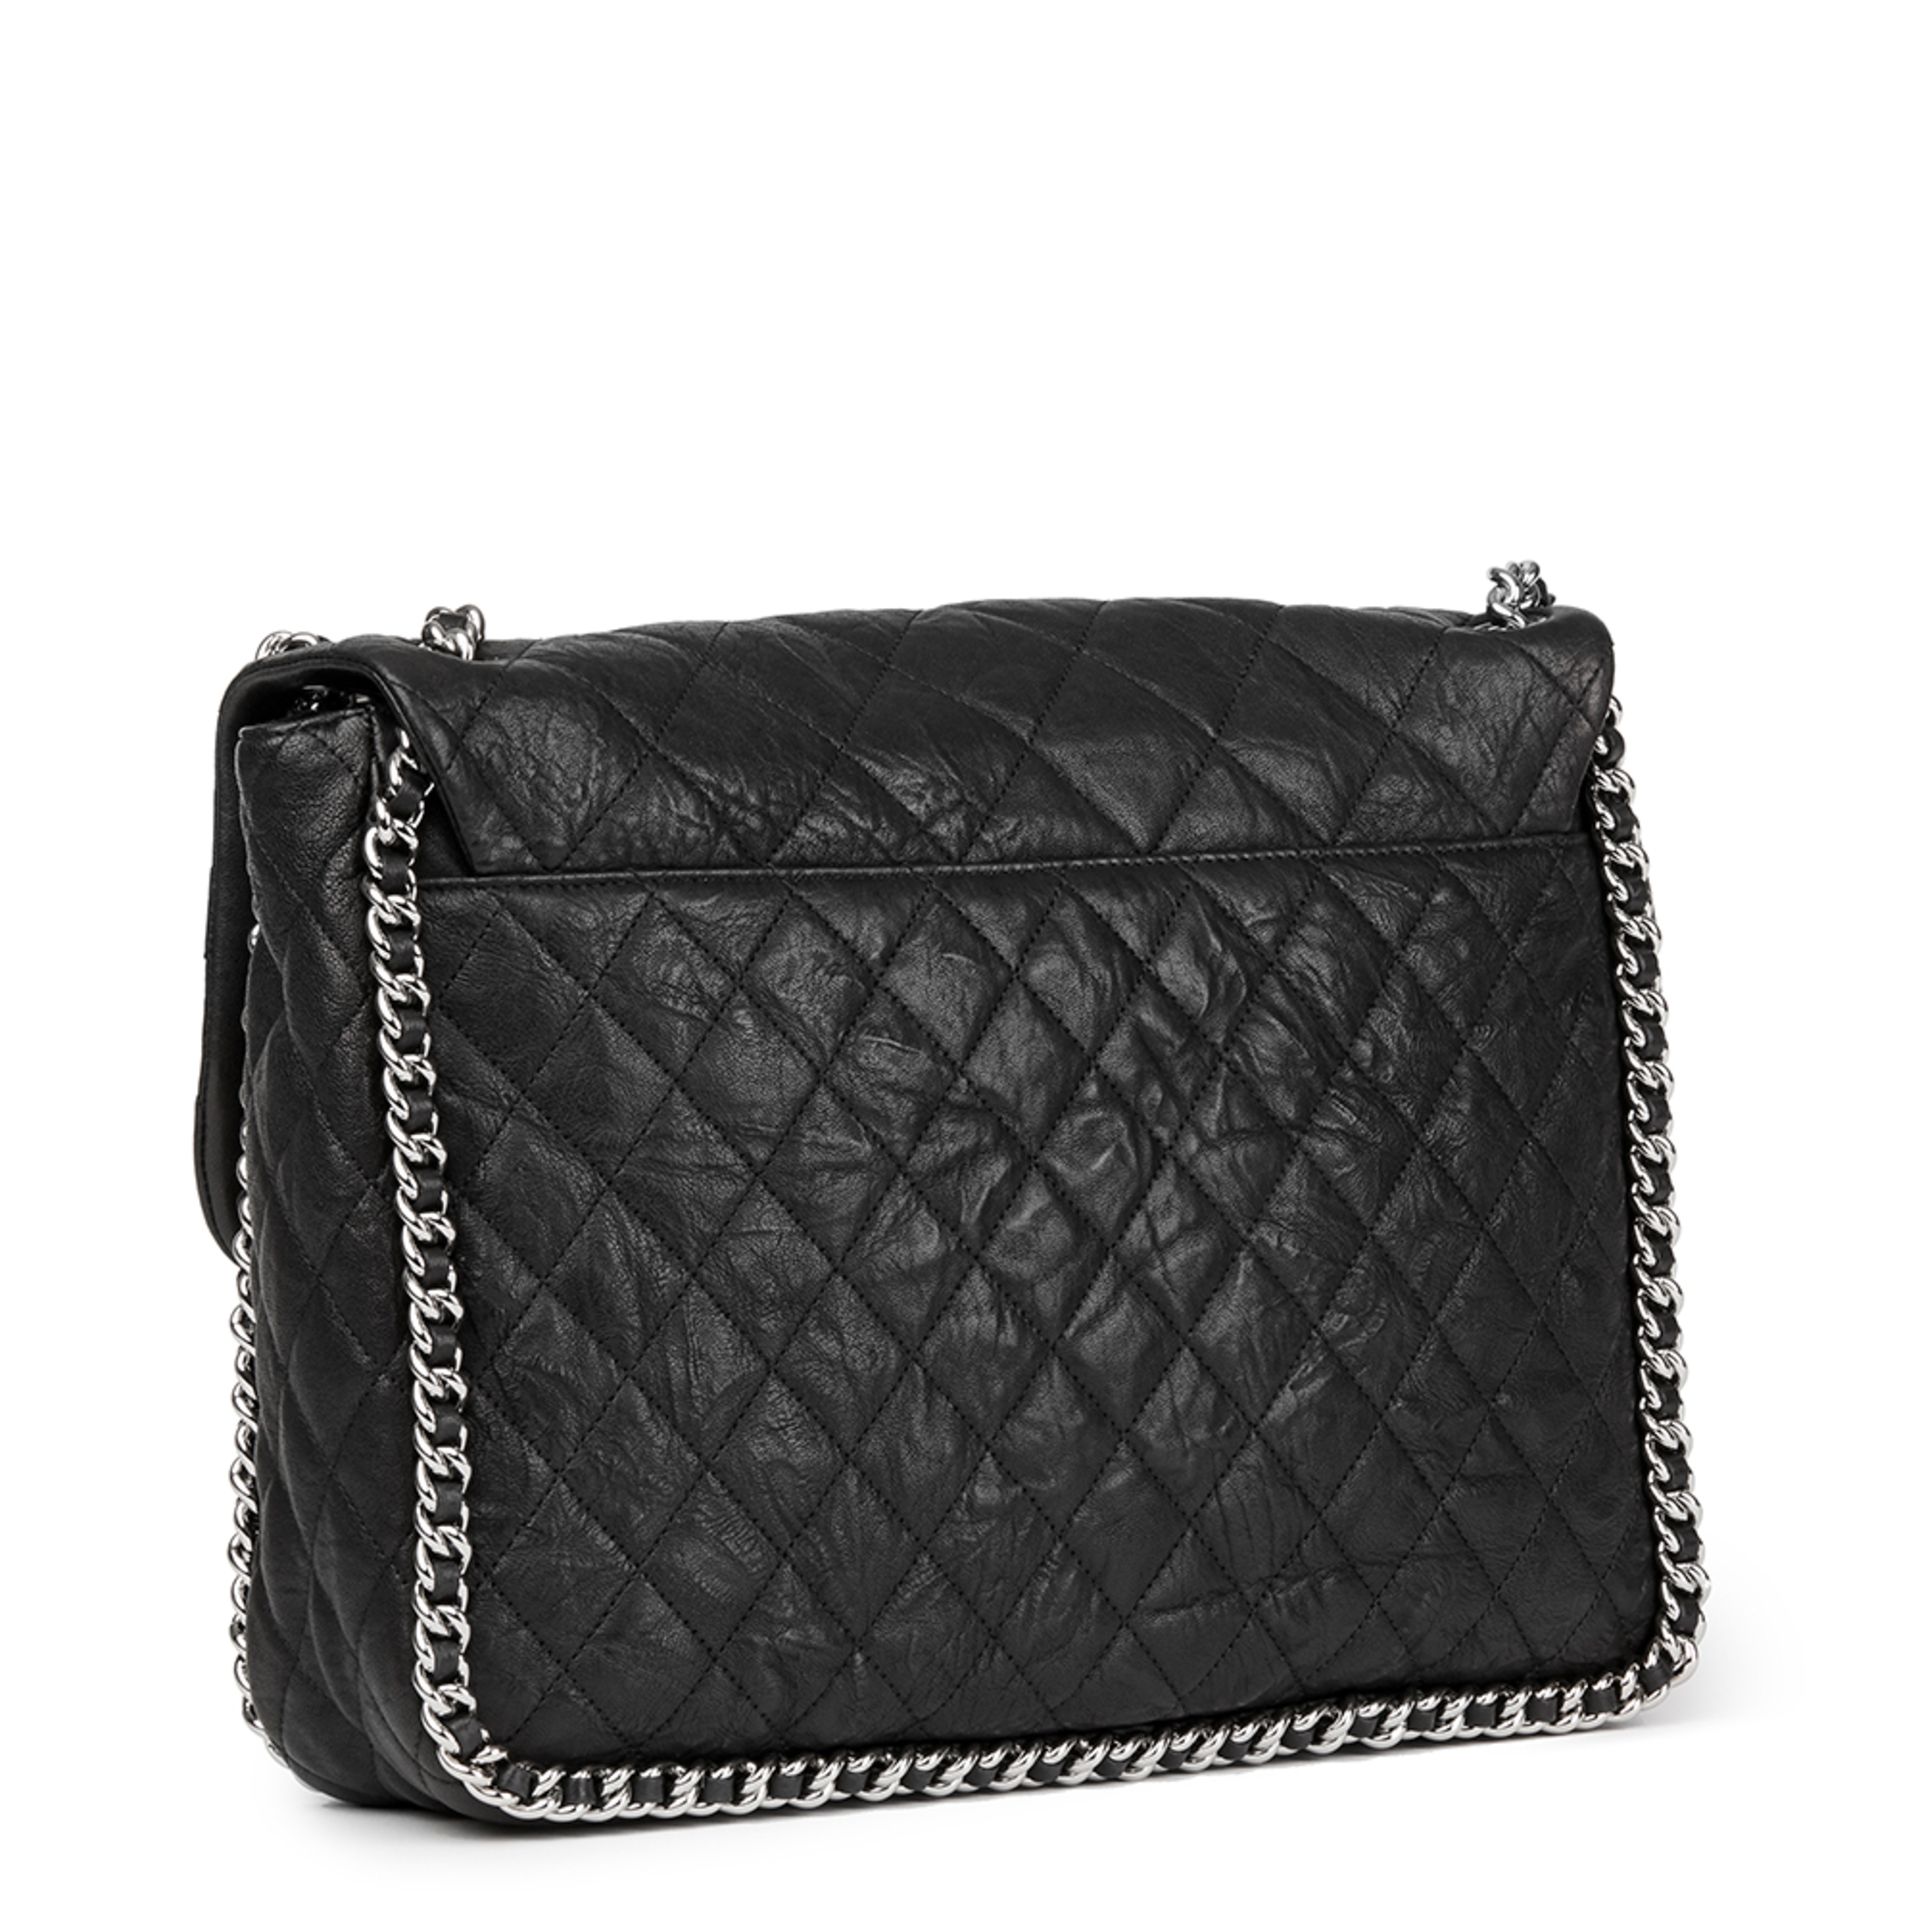 Chanel Black Quilted Calfskin Chain Around Maxi Flap Bag - Image 4 of 10